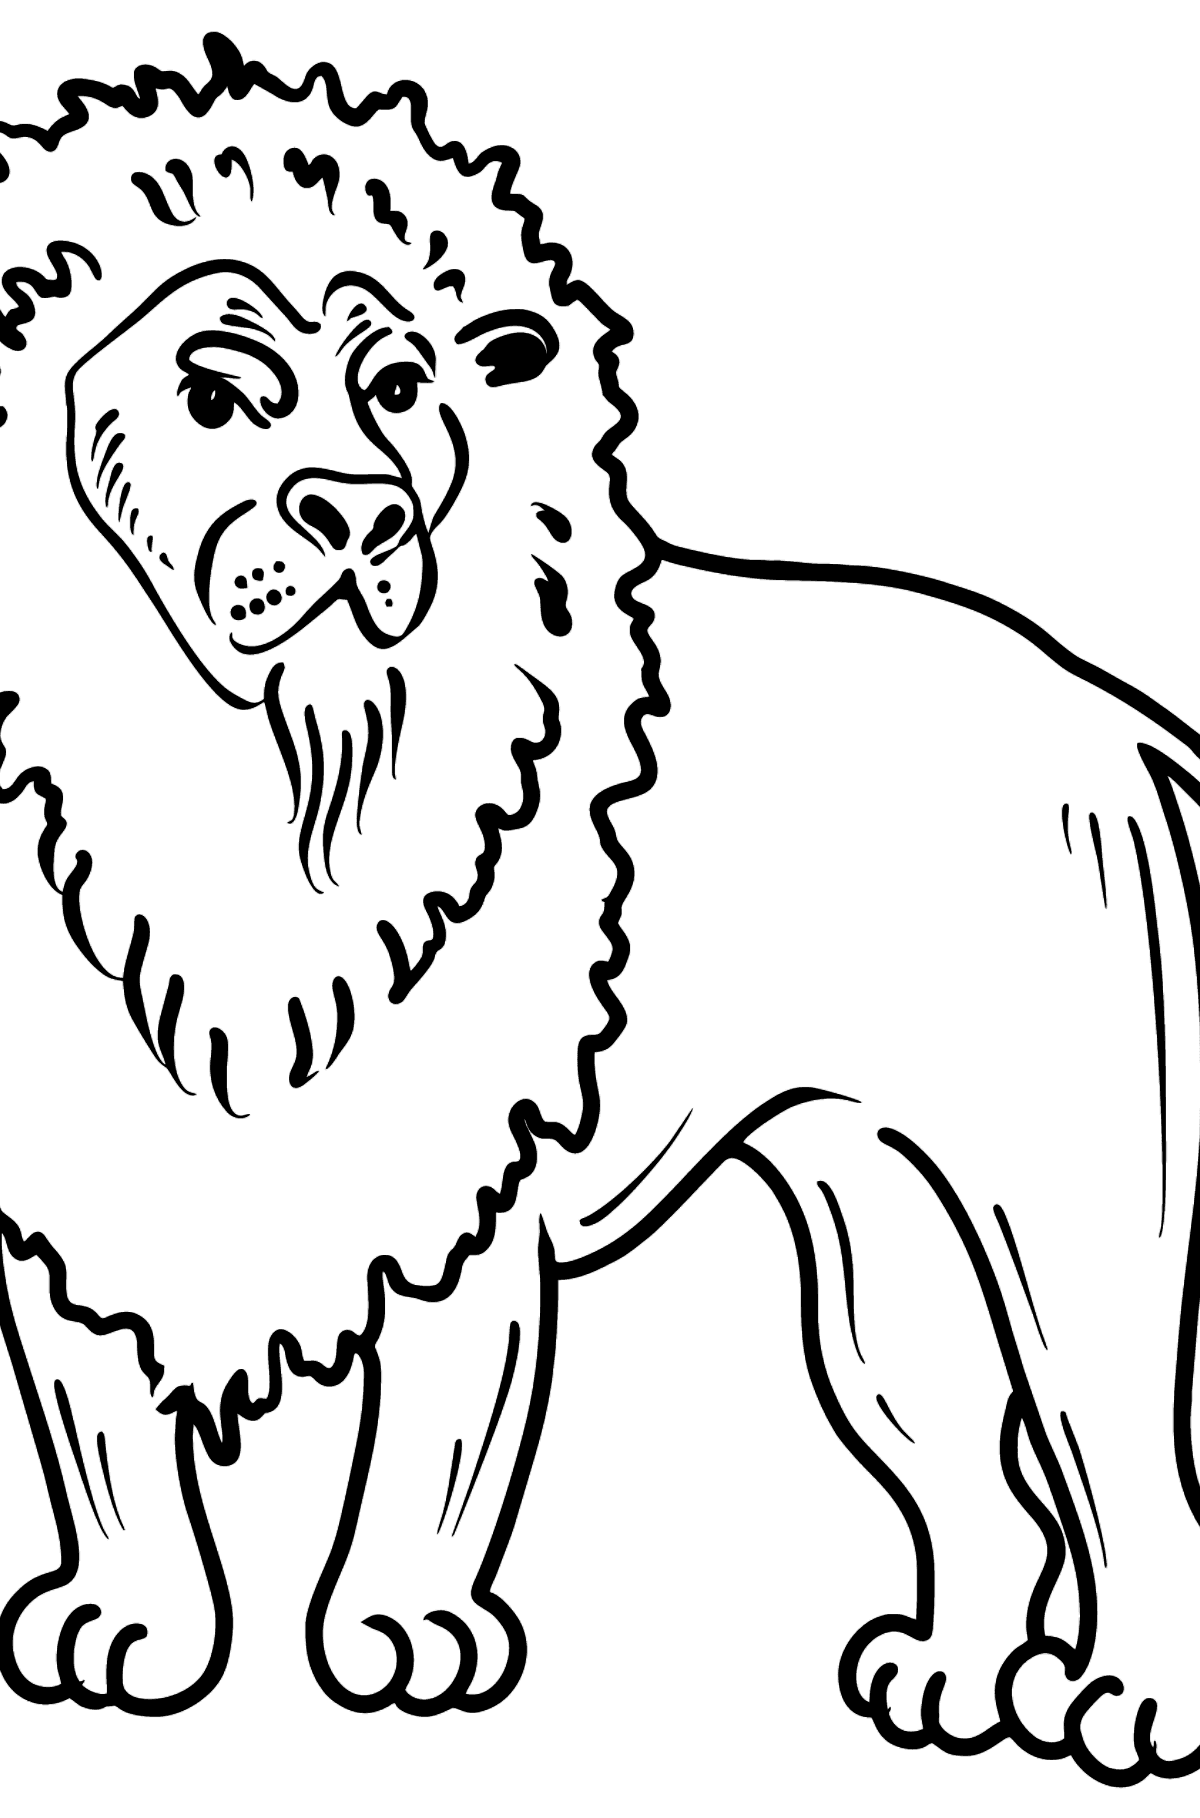 Lion coloring page - Coloring Pages for Kids